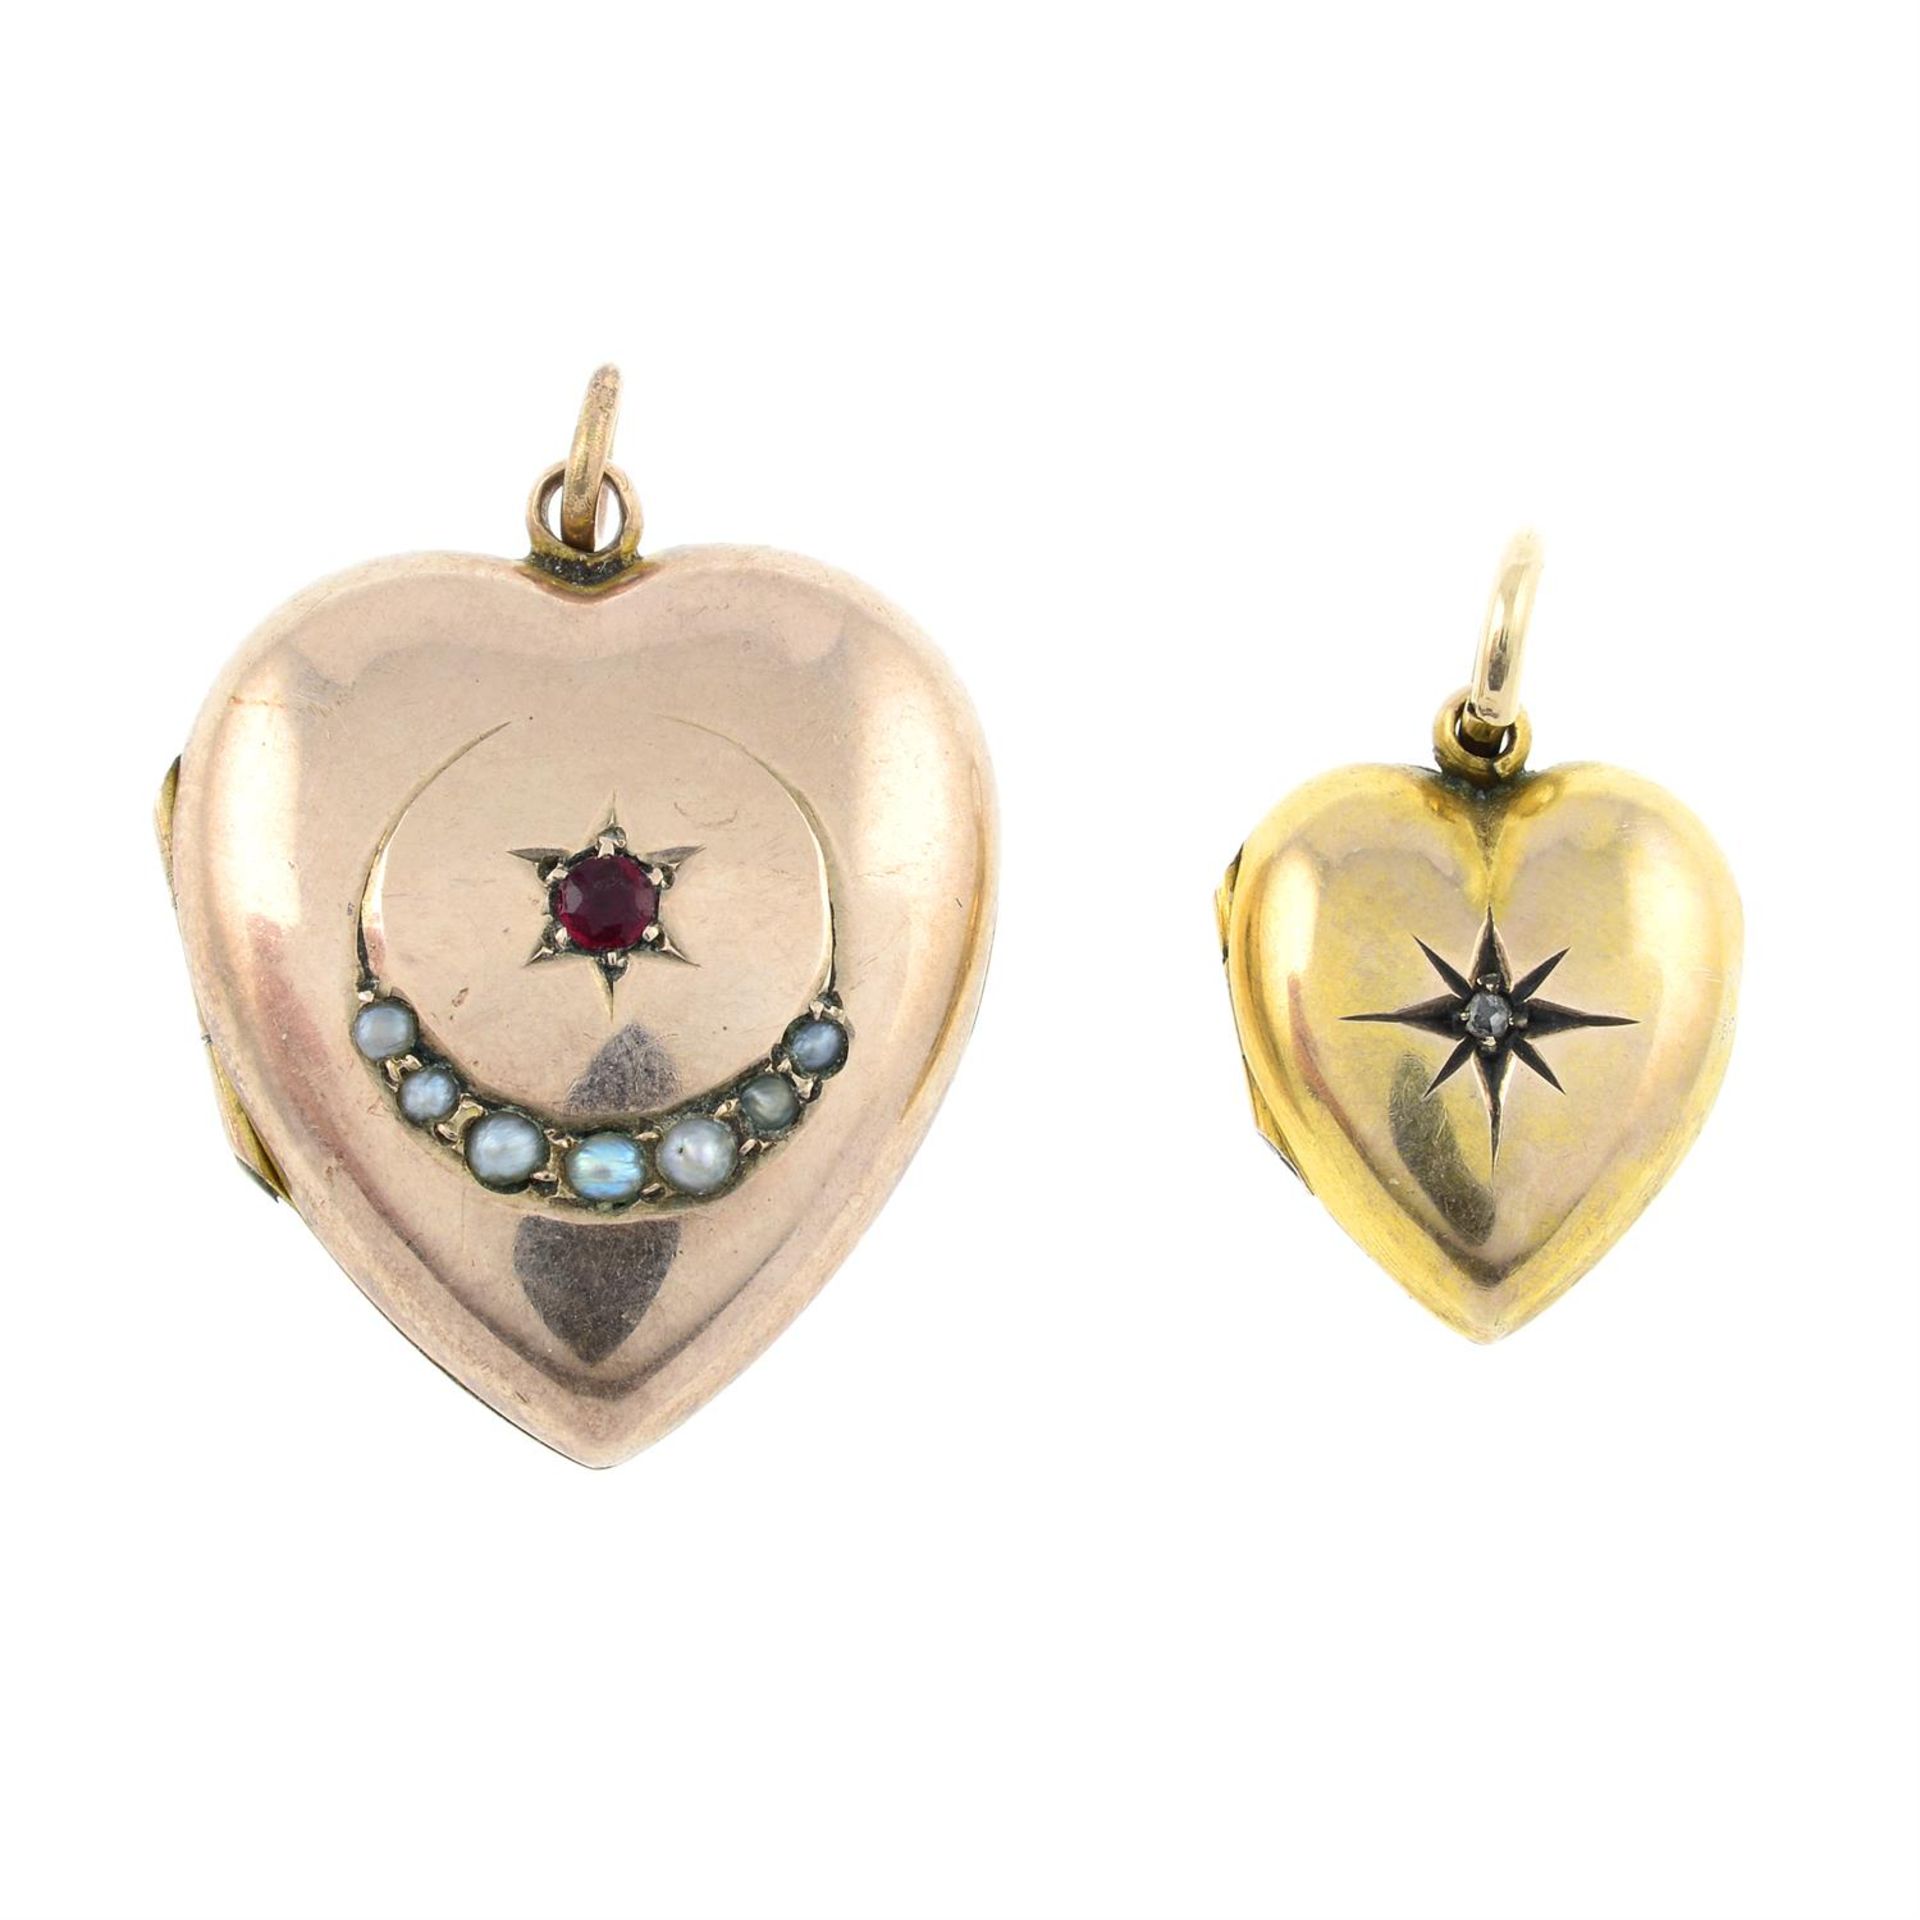 Two early 20th century rolled gold heart-shape lockets.